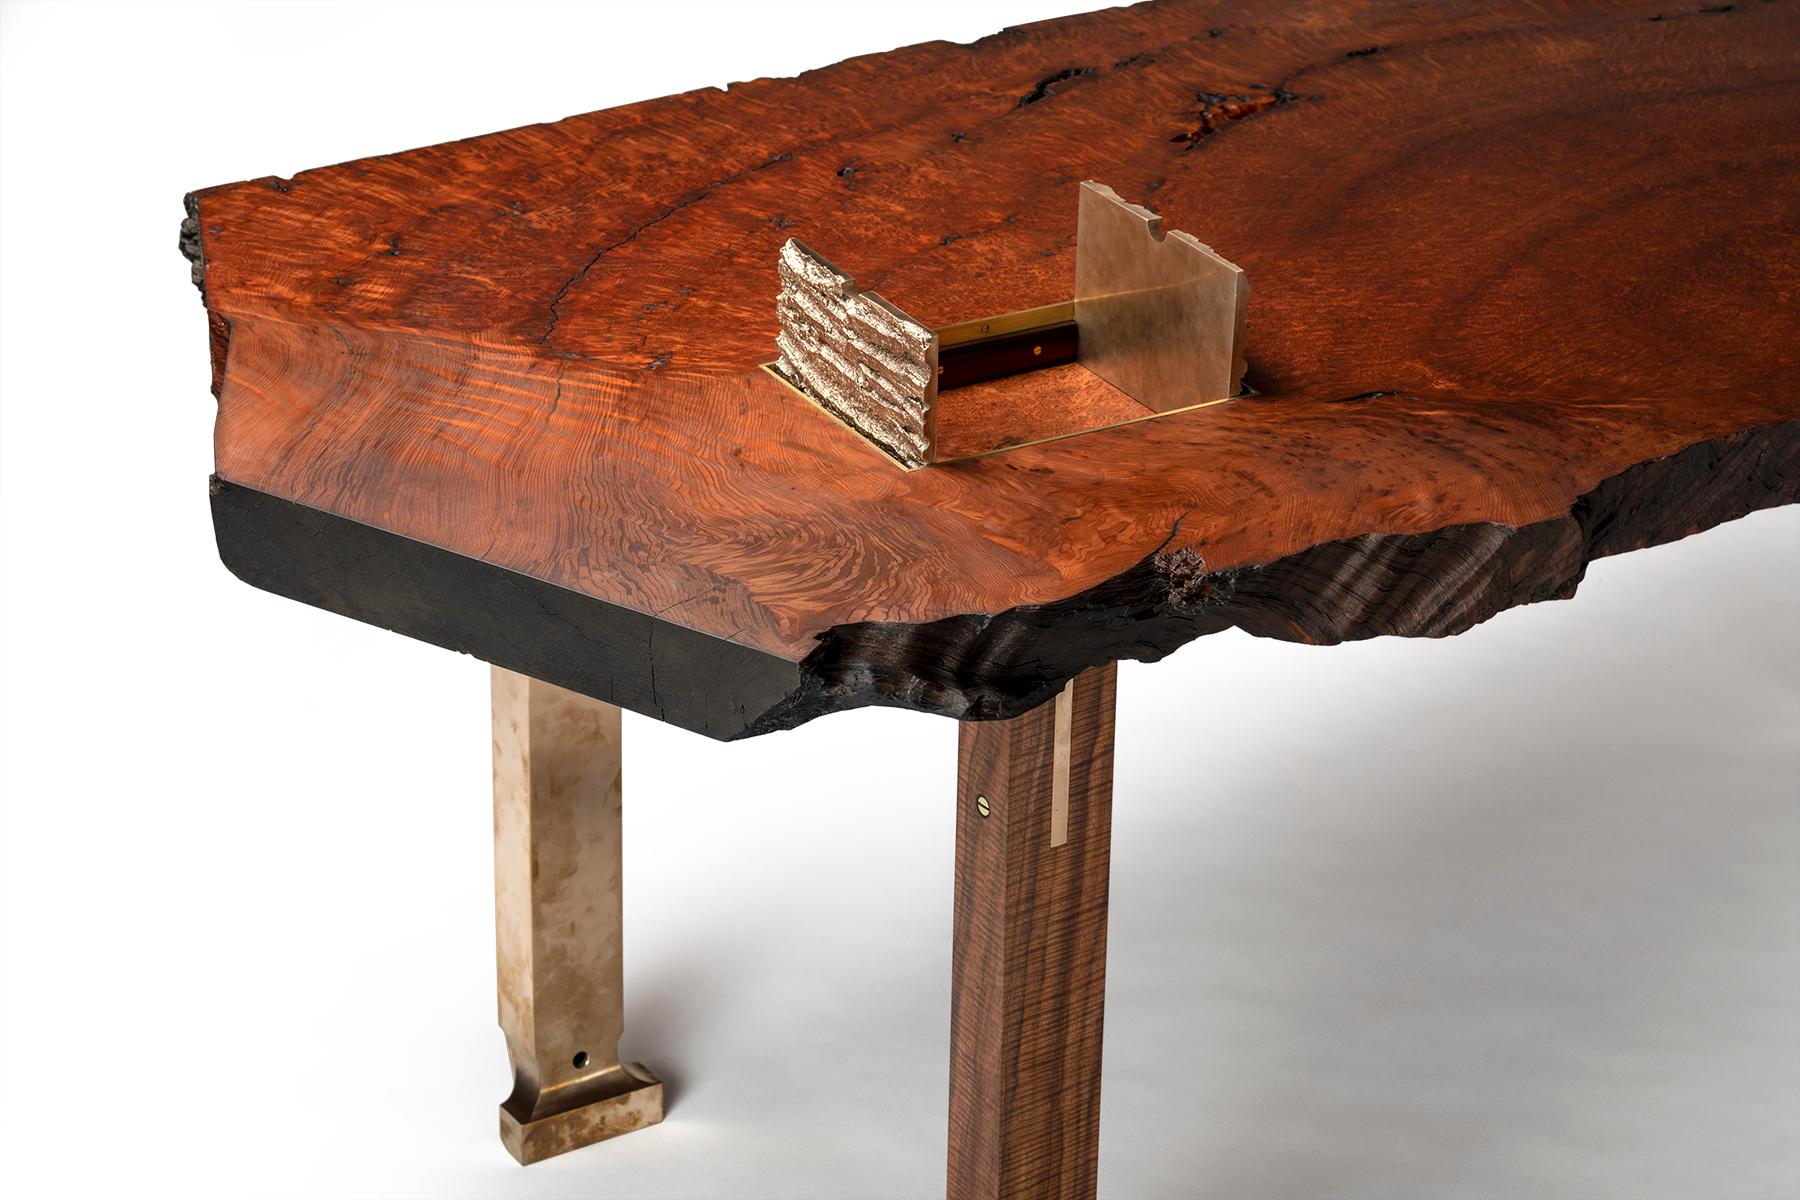 The Athol desk by Taylor Donsker features a live edge pommele old growth Redwood slab with recessed cast bronze tree bark doors opening to a concealed compartment. Three interlocking, solid, musical grade Oregon Walnut legs feature sculpted cast